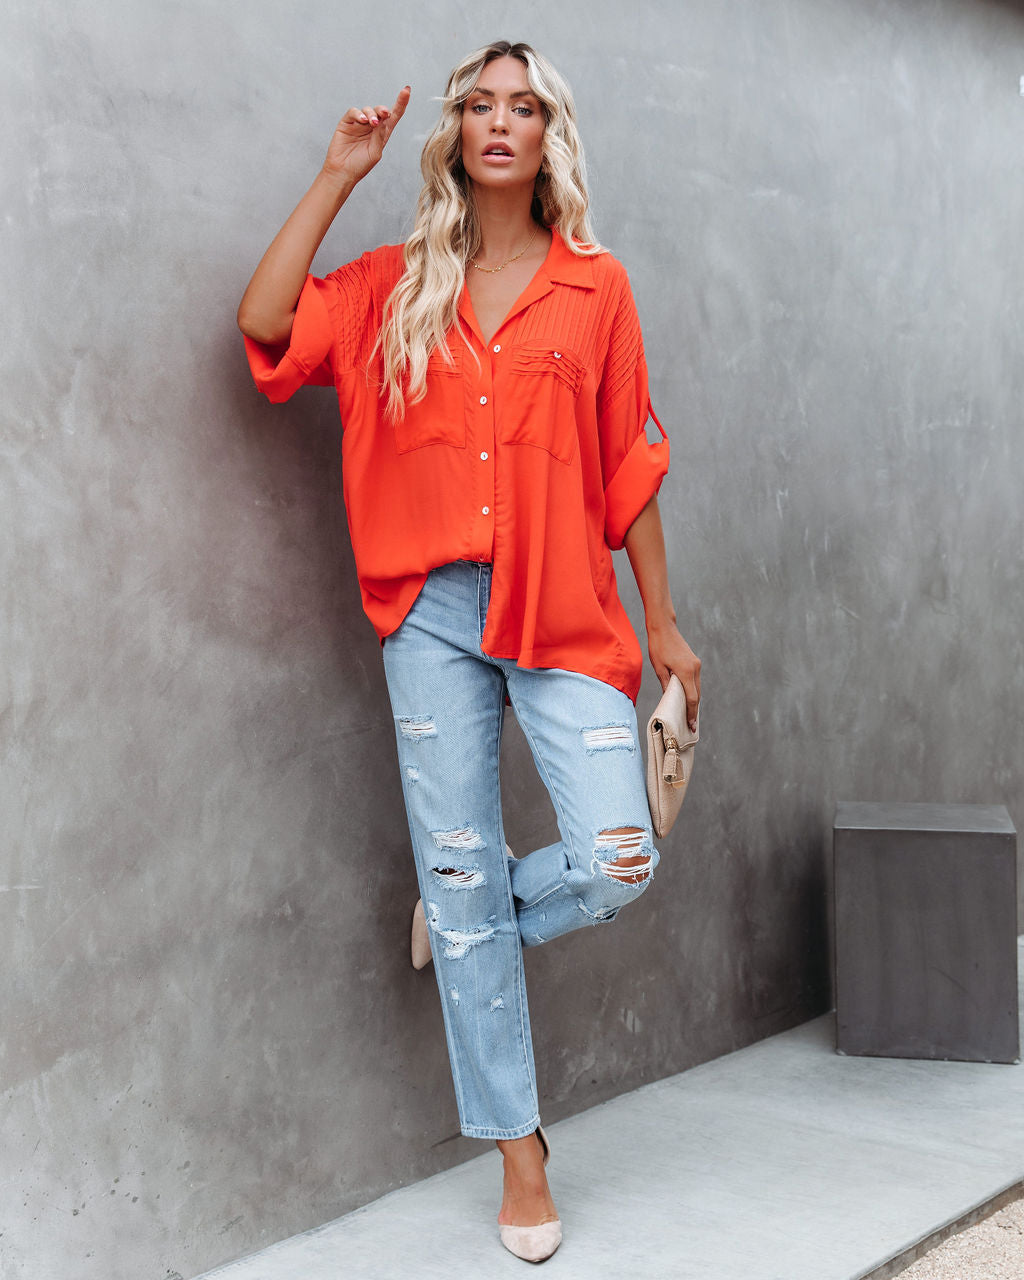 Too Good For You Button Down Top - Red Orange